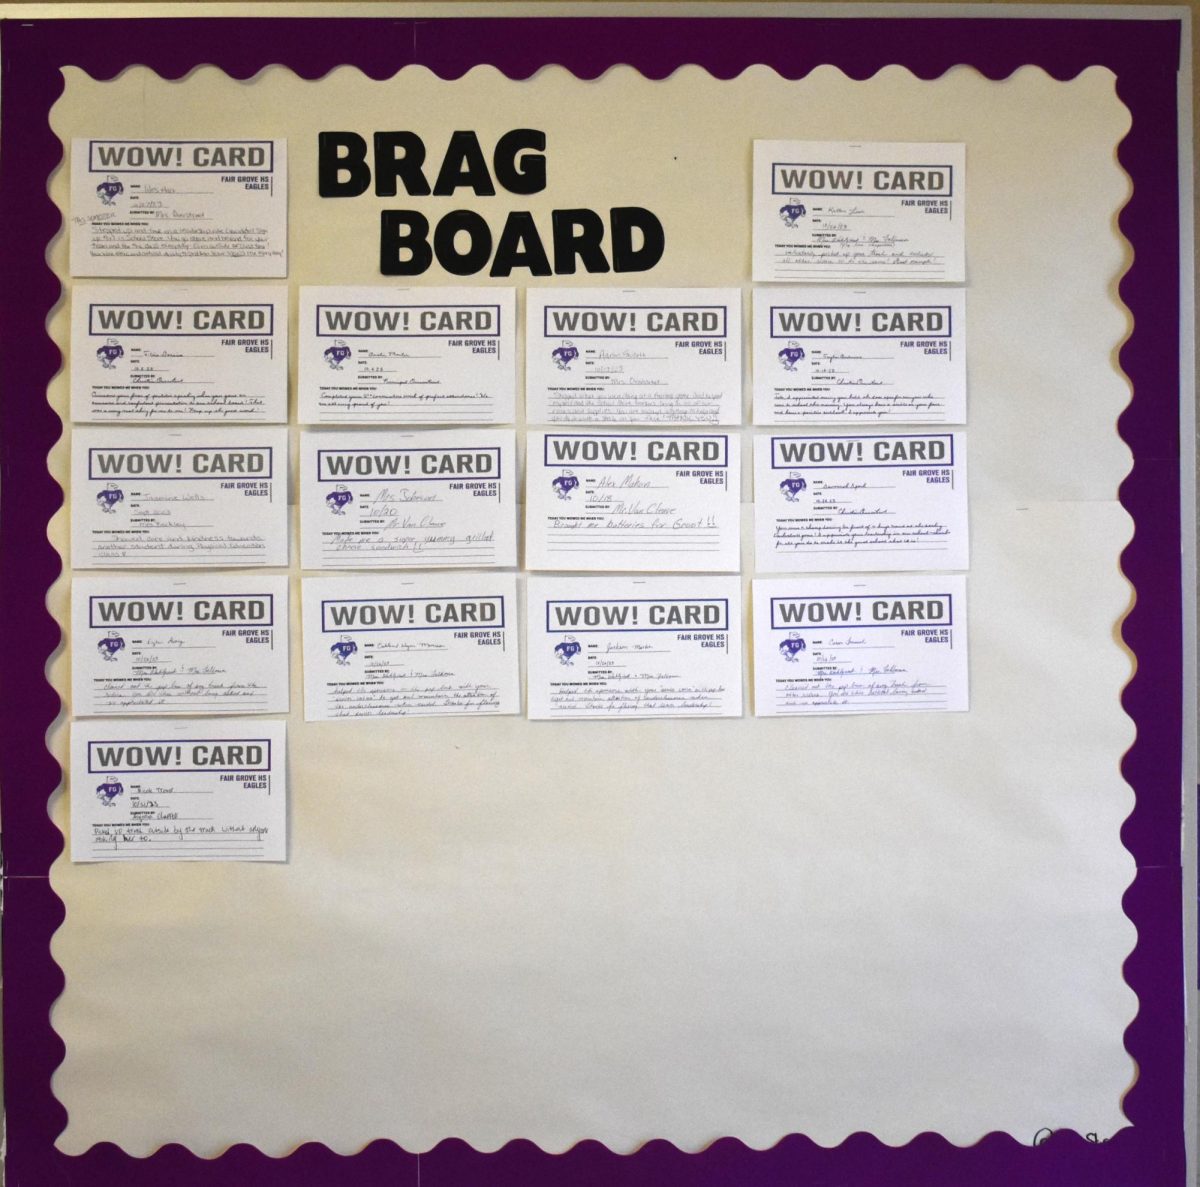 Wow+Cards+hanging+on+the+Brag+Board+in+the+High+School+Hallway